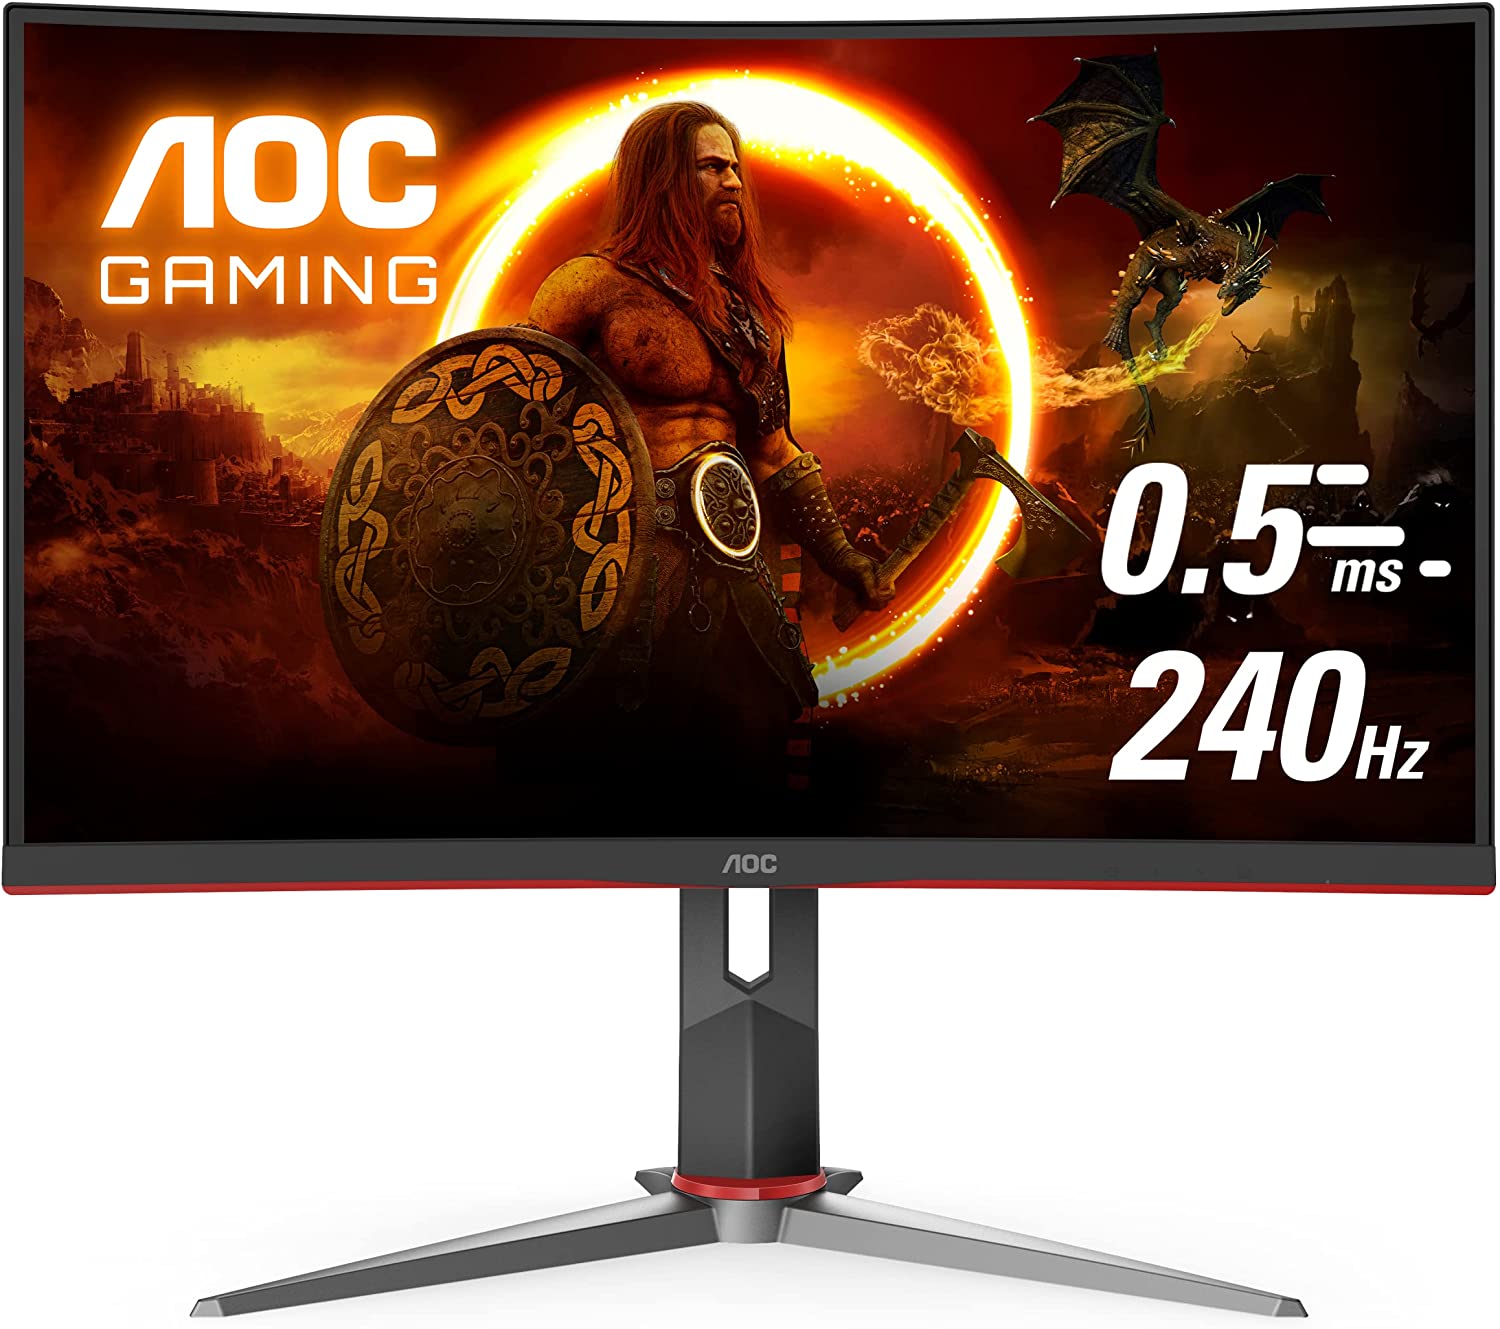 27" AOC C27G2Z 1080p 240Hz Curved Frameless Gaming Monitor $220 + free s/h at Amazon